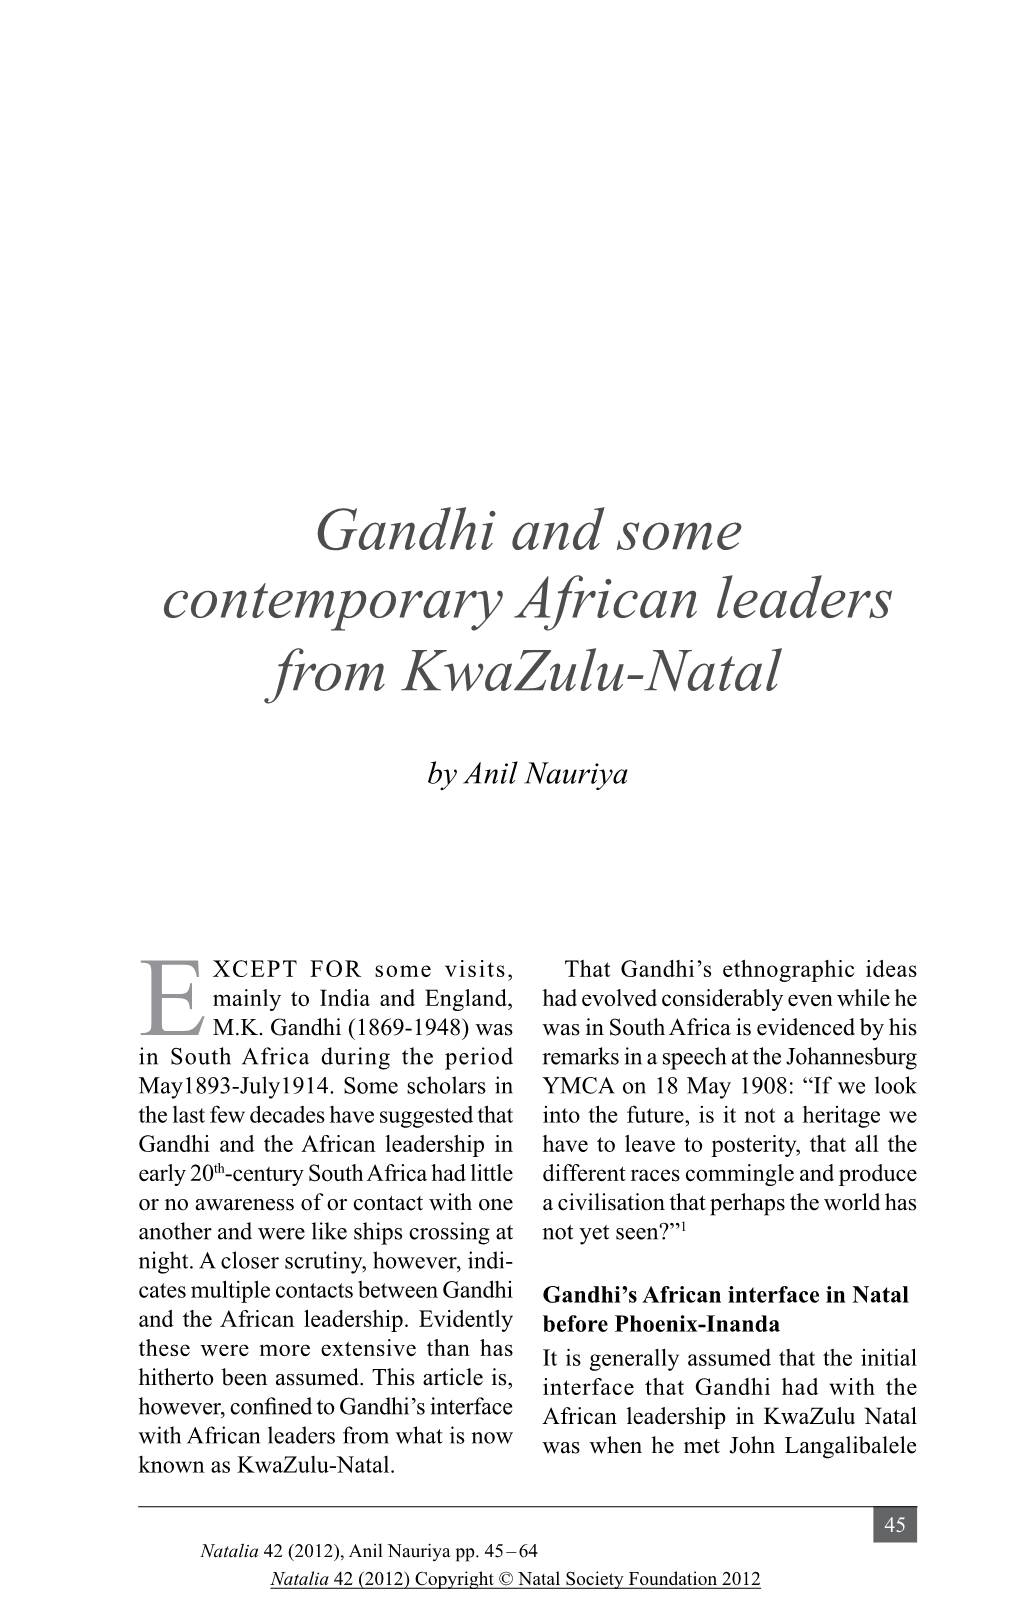 Gandhi and Some Contemporary African Leaders from Kwazulu-Natal